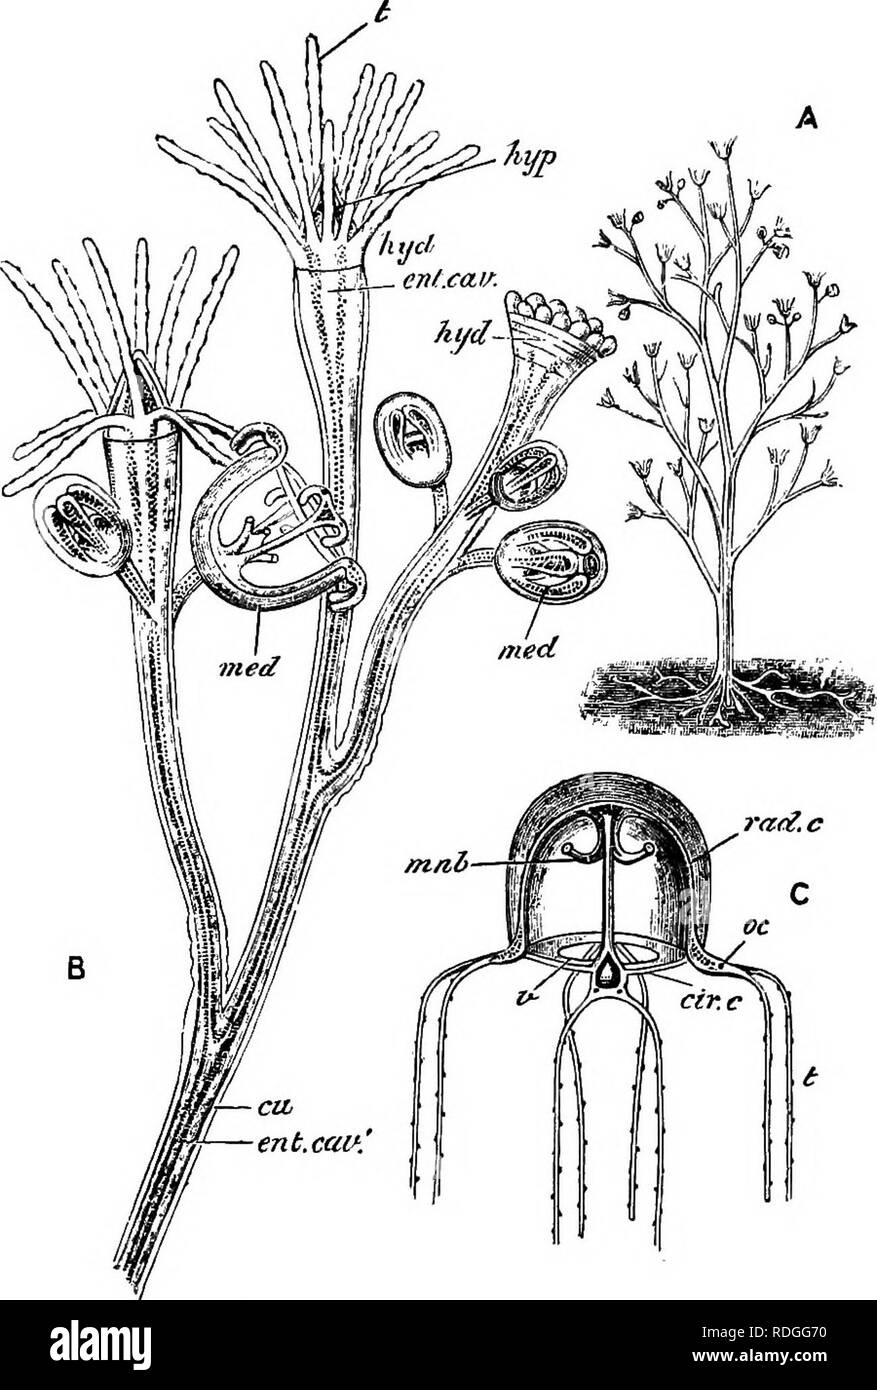 . An elementary course of practical zoology. Zoology. Fig. 76.—Bougainvillea ramosa.  A, a complete living colony of the natural size, showing the branched stem and root-like organ of attachment. B, a portion of the same magnified, showing the branched stem bearing hydranths ihyd) and medusse (med)j one of the latter nearly mature, the others im- mature ; each hydranth has a circlet of tentacles (^) surrounding a hypo- stome {kyp and contains an enteric cavity {e^it. cav) continuous with a narrow canal (ent. cav') in the stem. The stem is covered by a cuticle {c7t). C, a medusa after liberat Stock Photo